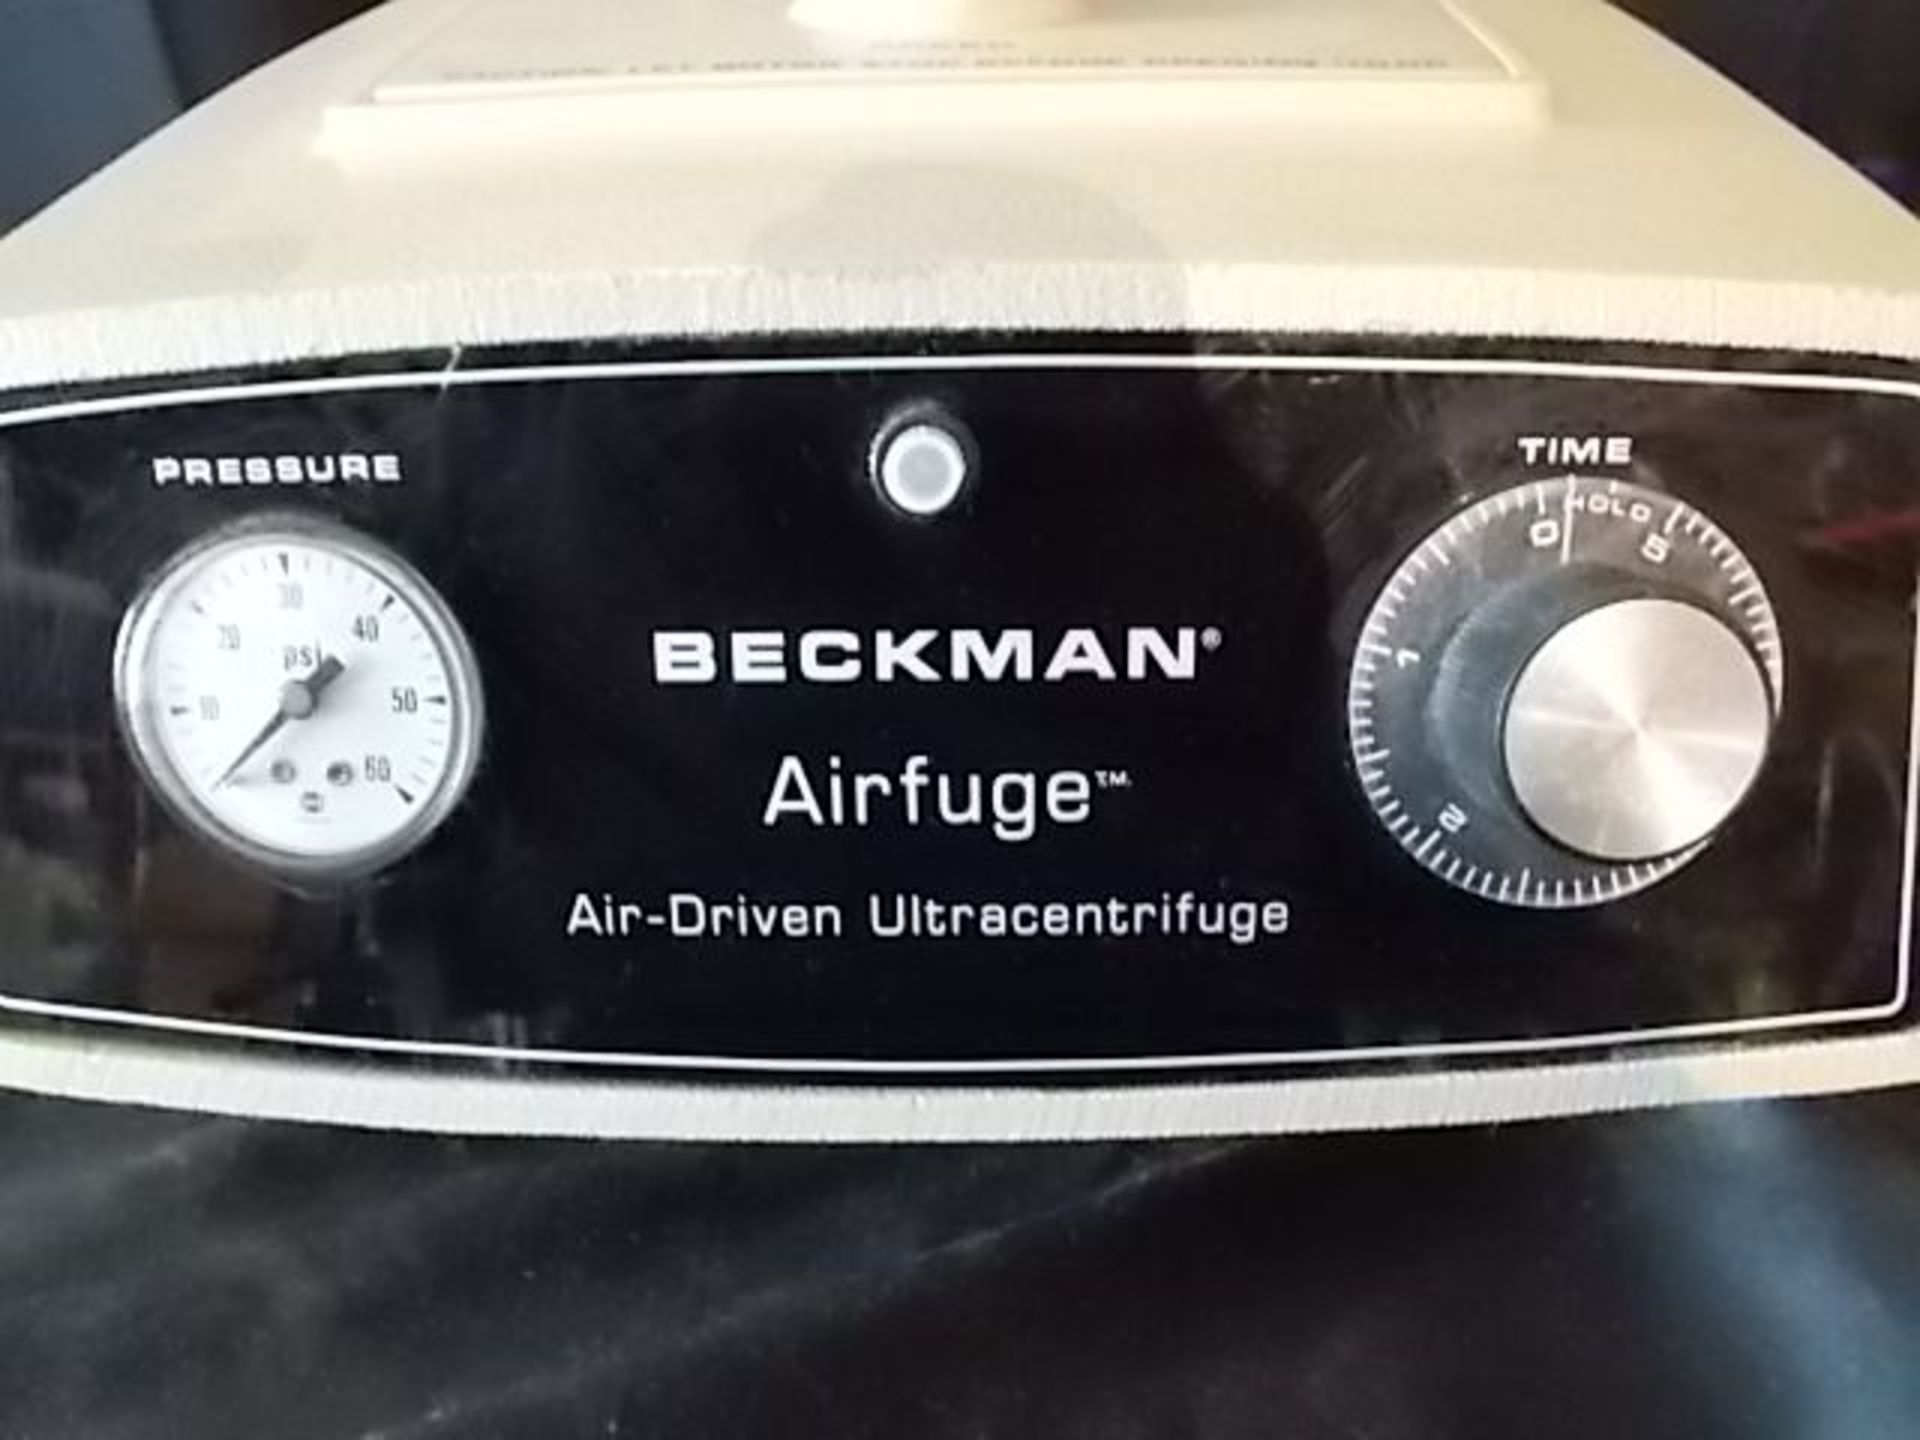 Beckman Airfuge Air-Driven Ultra Centrifuge, Qty 1, 321096784794 - Image 2 of 10